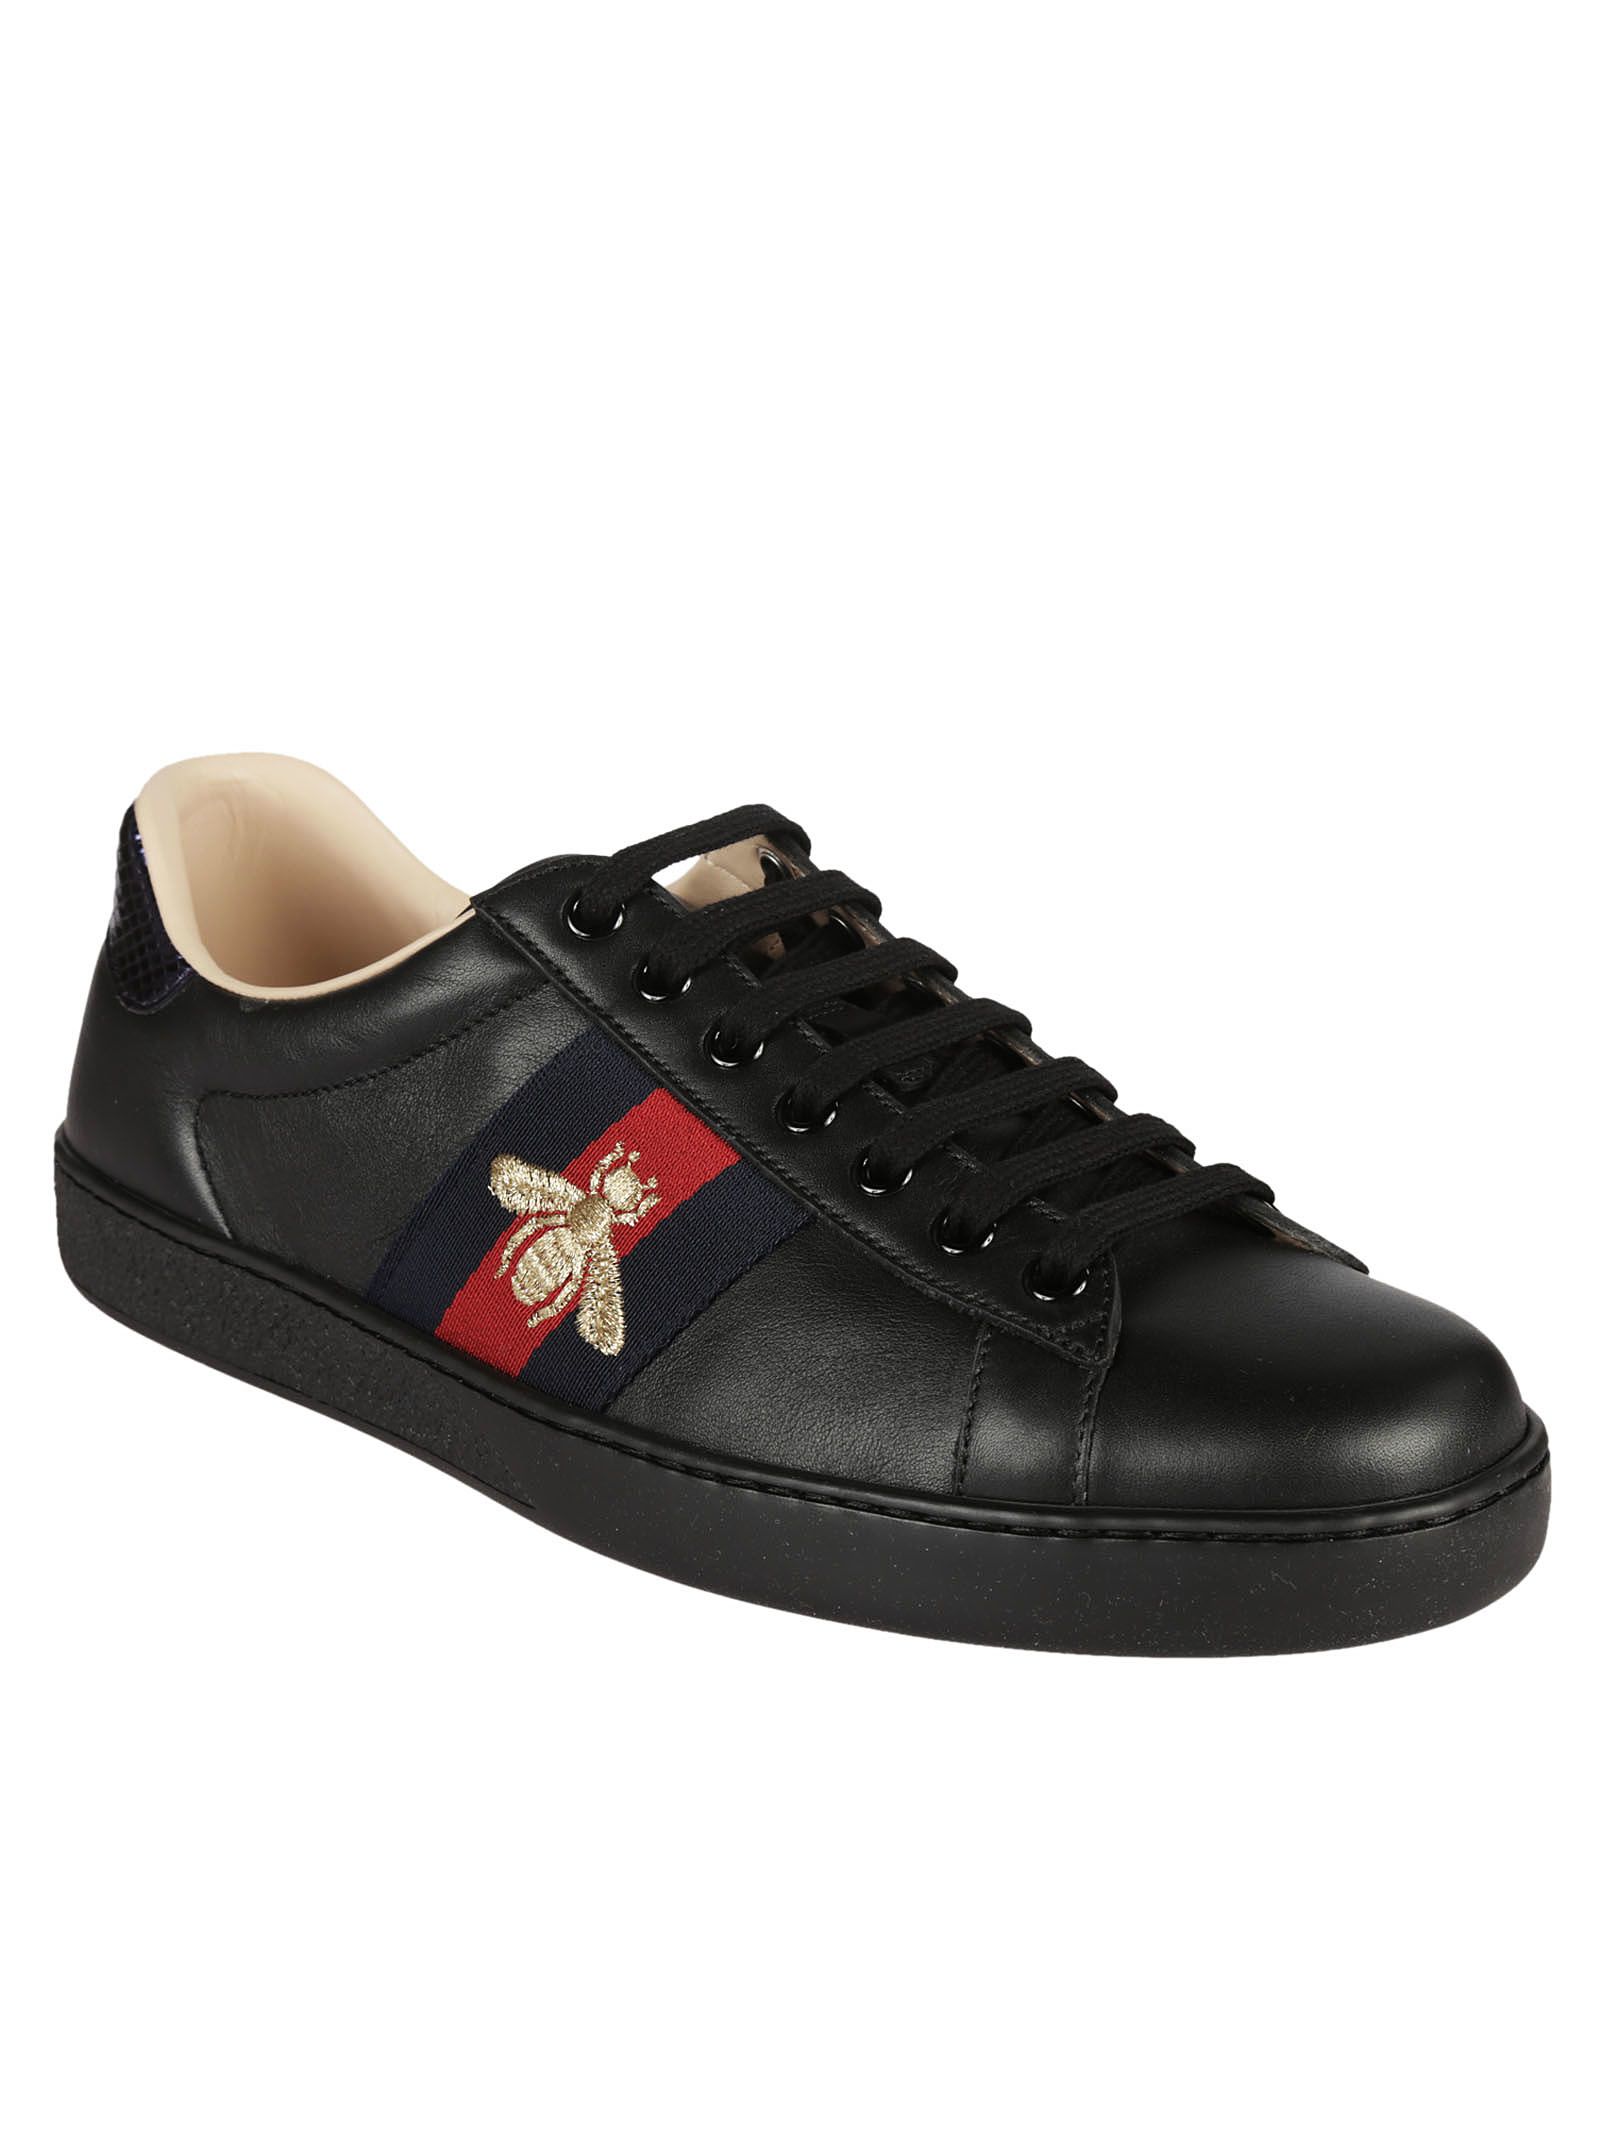 italist | Best price in the market for Gucci Gucci Ace Embroidered Low-Top Sneakers - Black ...